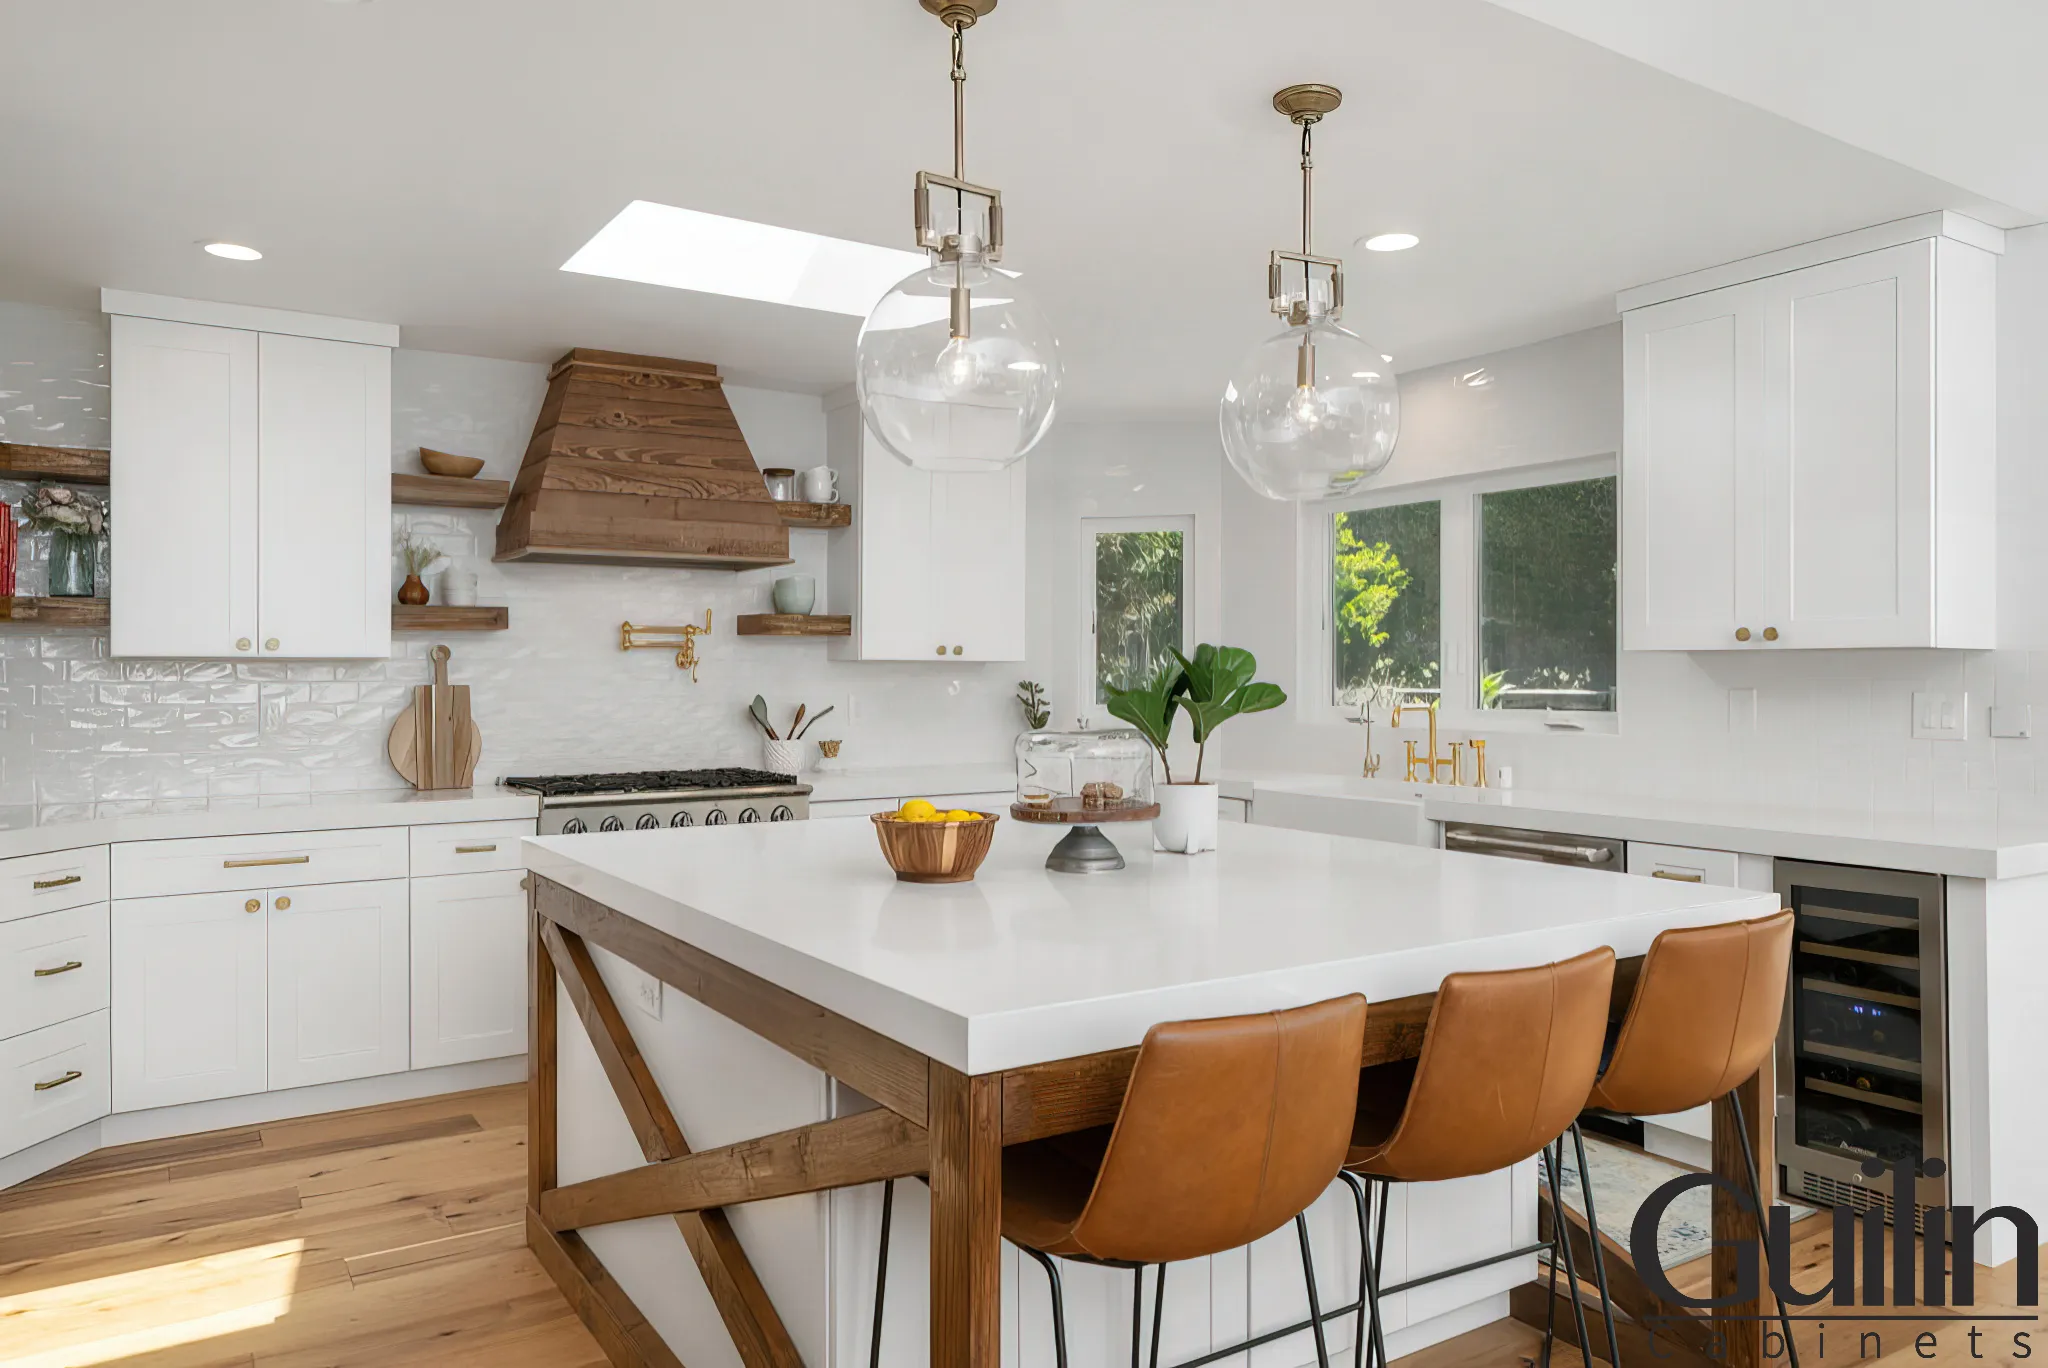 White Kitchen Project Farm House Style Remodel By Guilin Cabinets In California 4